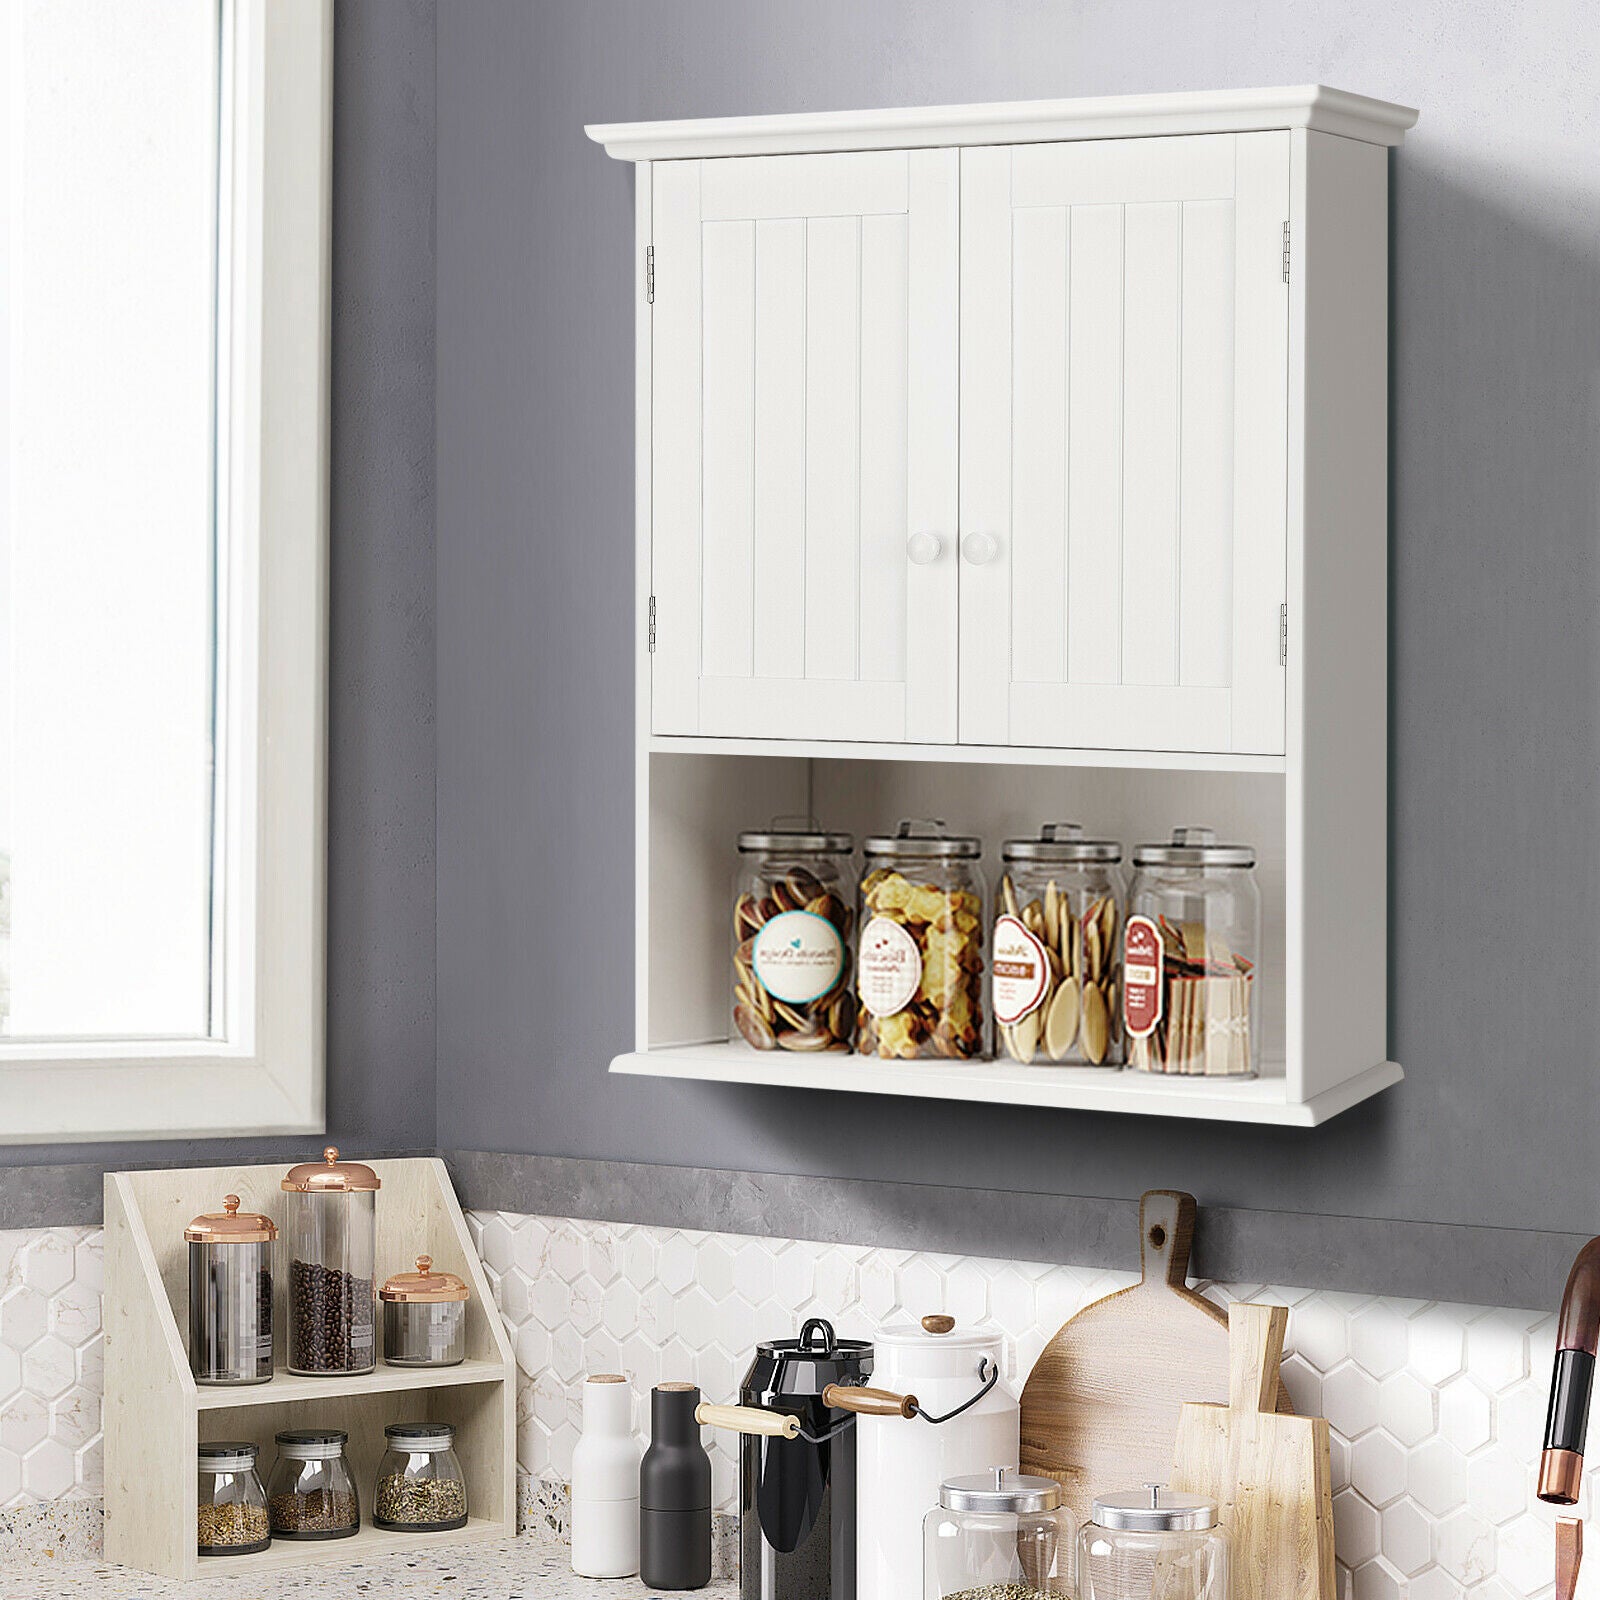 Wall Mounted Bathroom Storage Cabinet with Adjustable Shelf-White